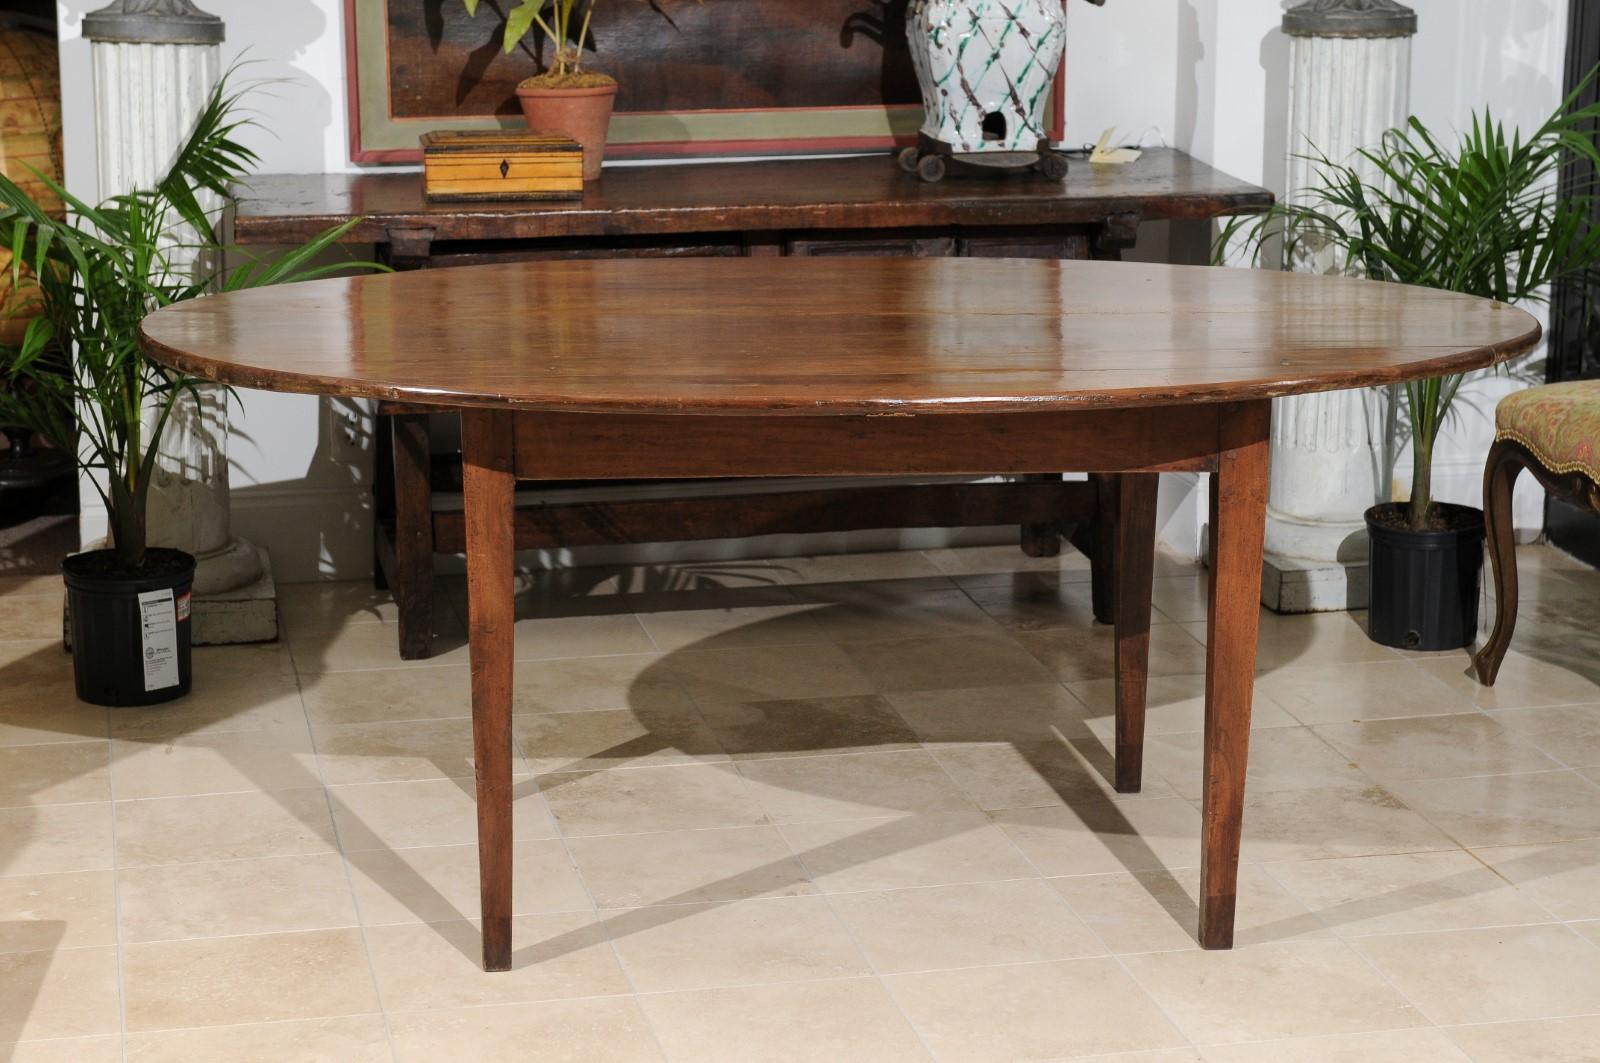  French Oval Farm Table with Tapered Legs 5